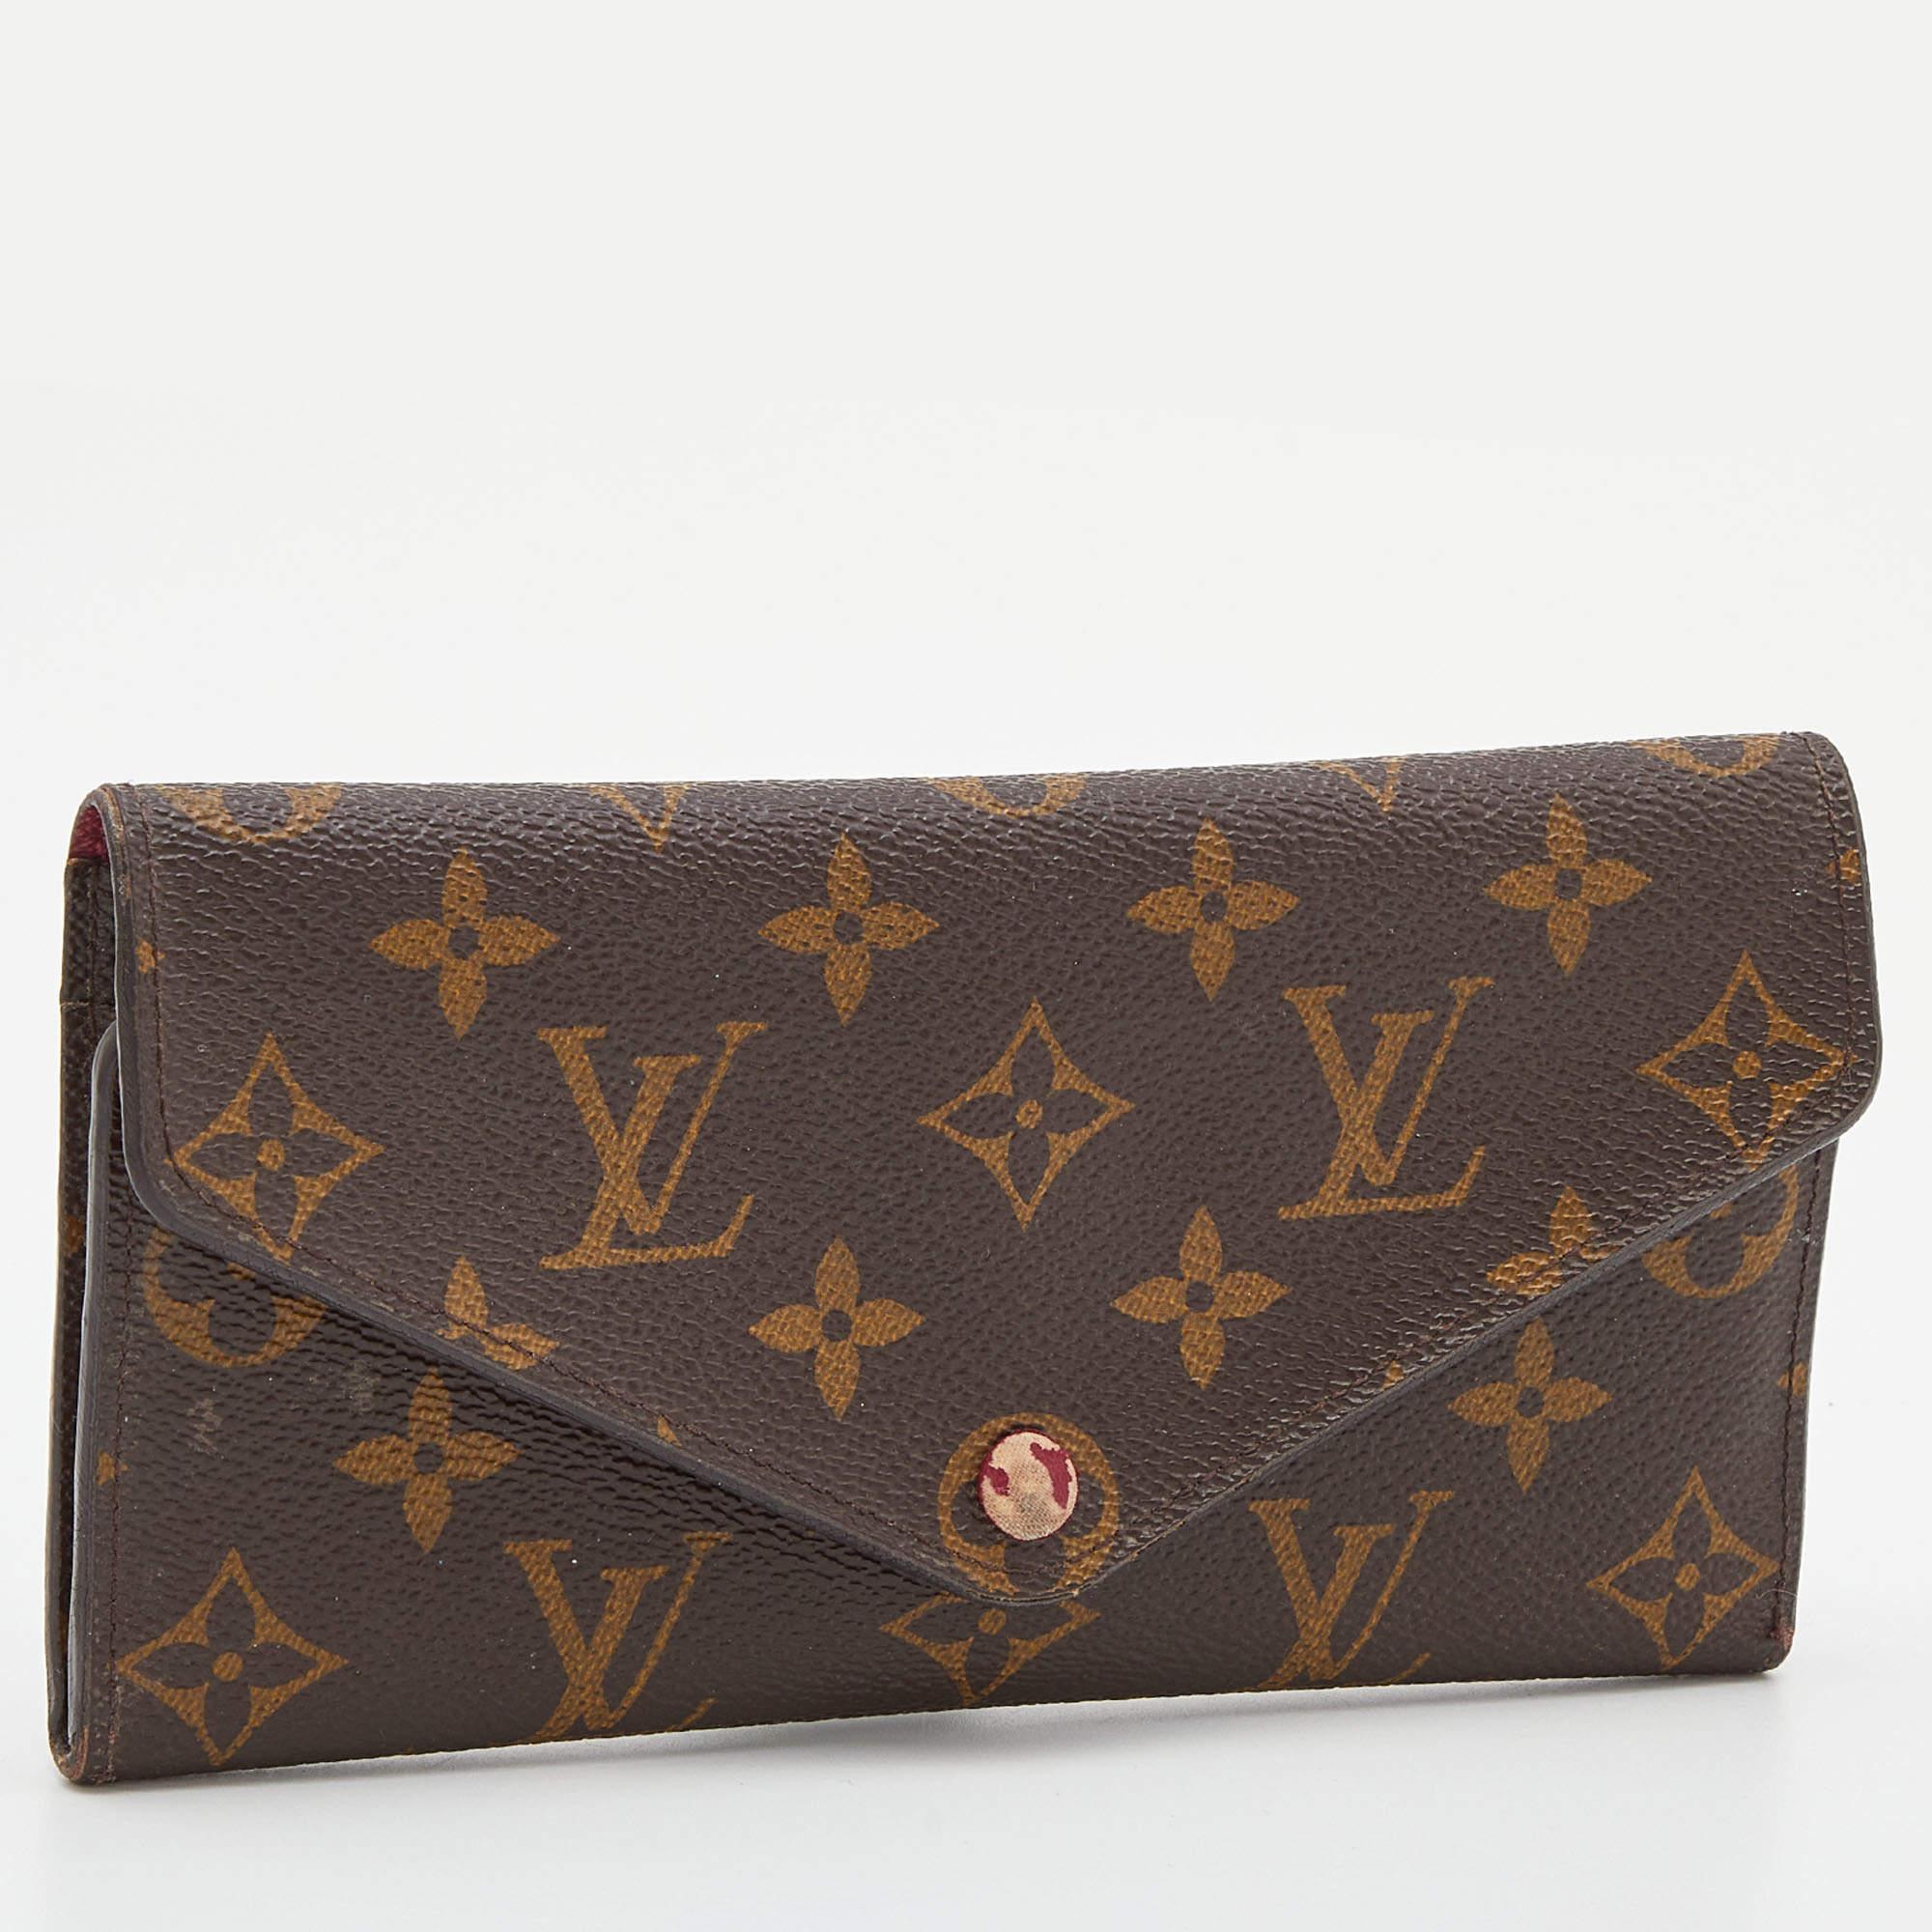 Louis Vuitton never fails to impress us and yet again charms us with this lovely Josephine wallet. It is crafted from Monogram canvas and features a front flap button closure. It opens to reveal a leather-lined interior that is equipped with